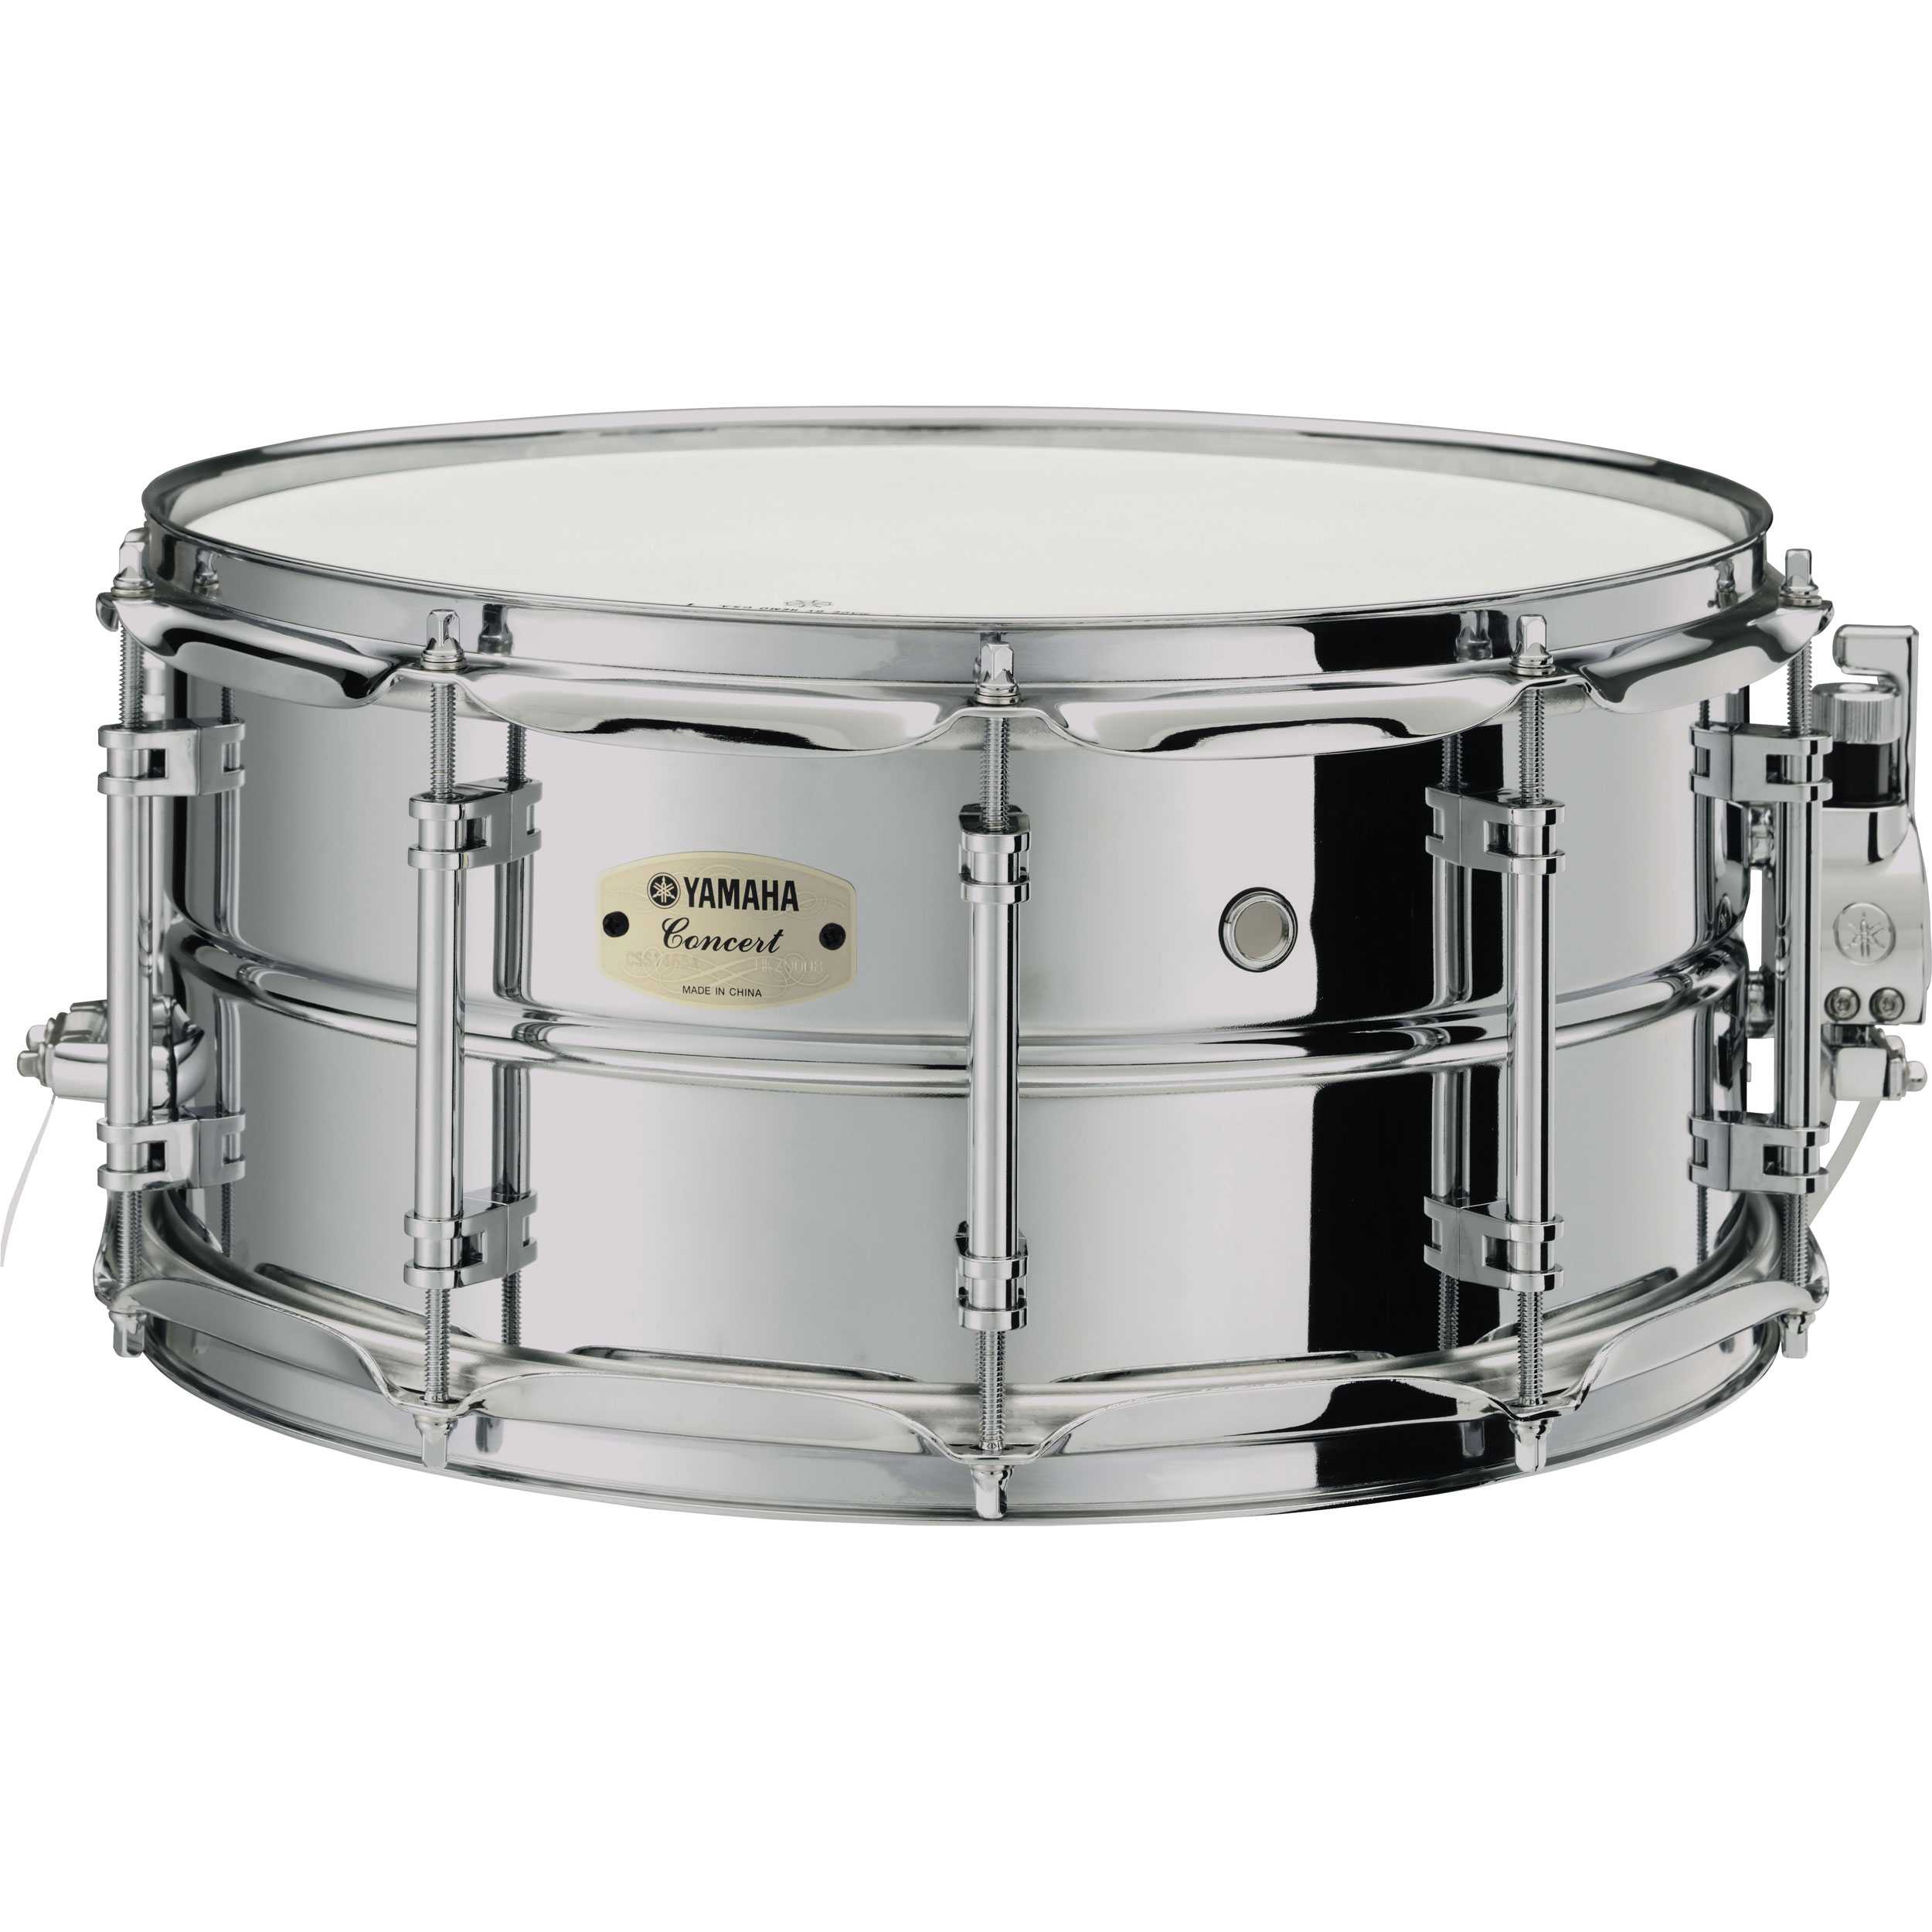 Yamaha CSS-1450A 14x5 inch Snare Drum